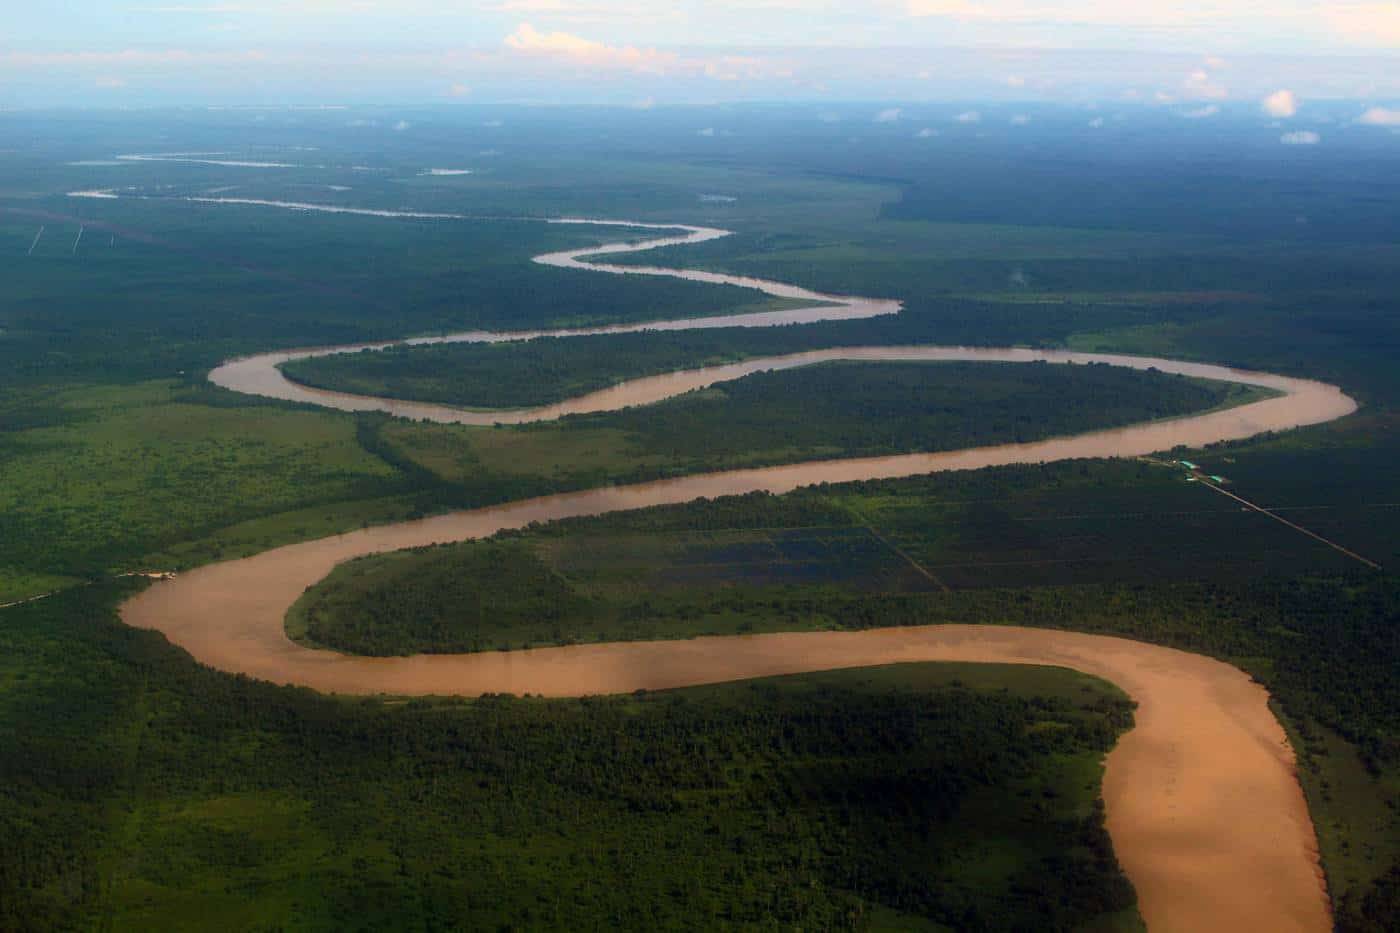 CENTRAL KALIMANTAN – ACROSS ONE THOUSAND RIVERS